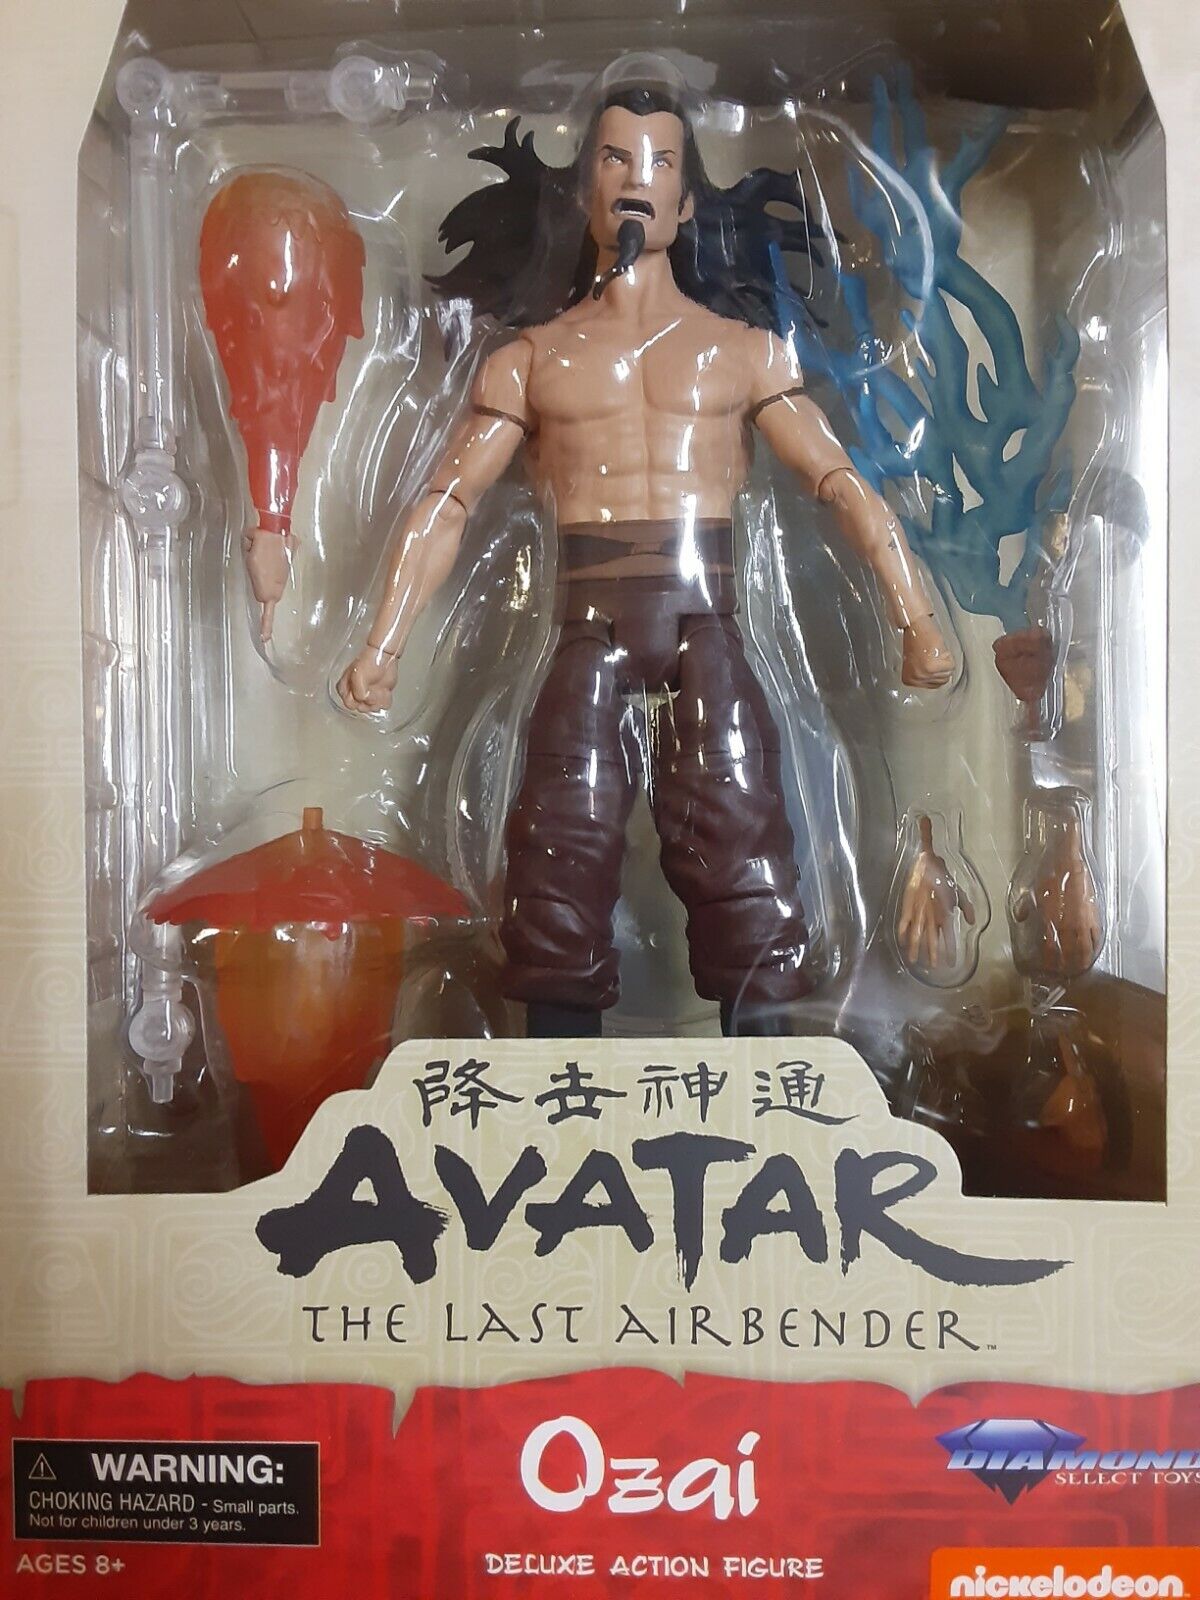 Avatar: The Last Airbender Series 1 Lord Ozai Action Figure